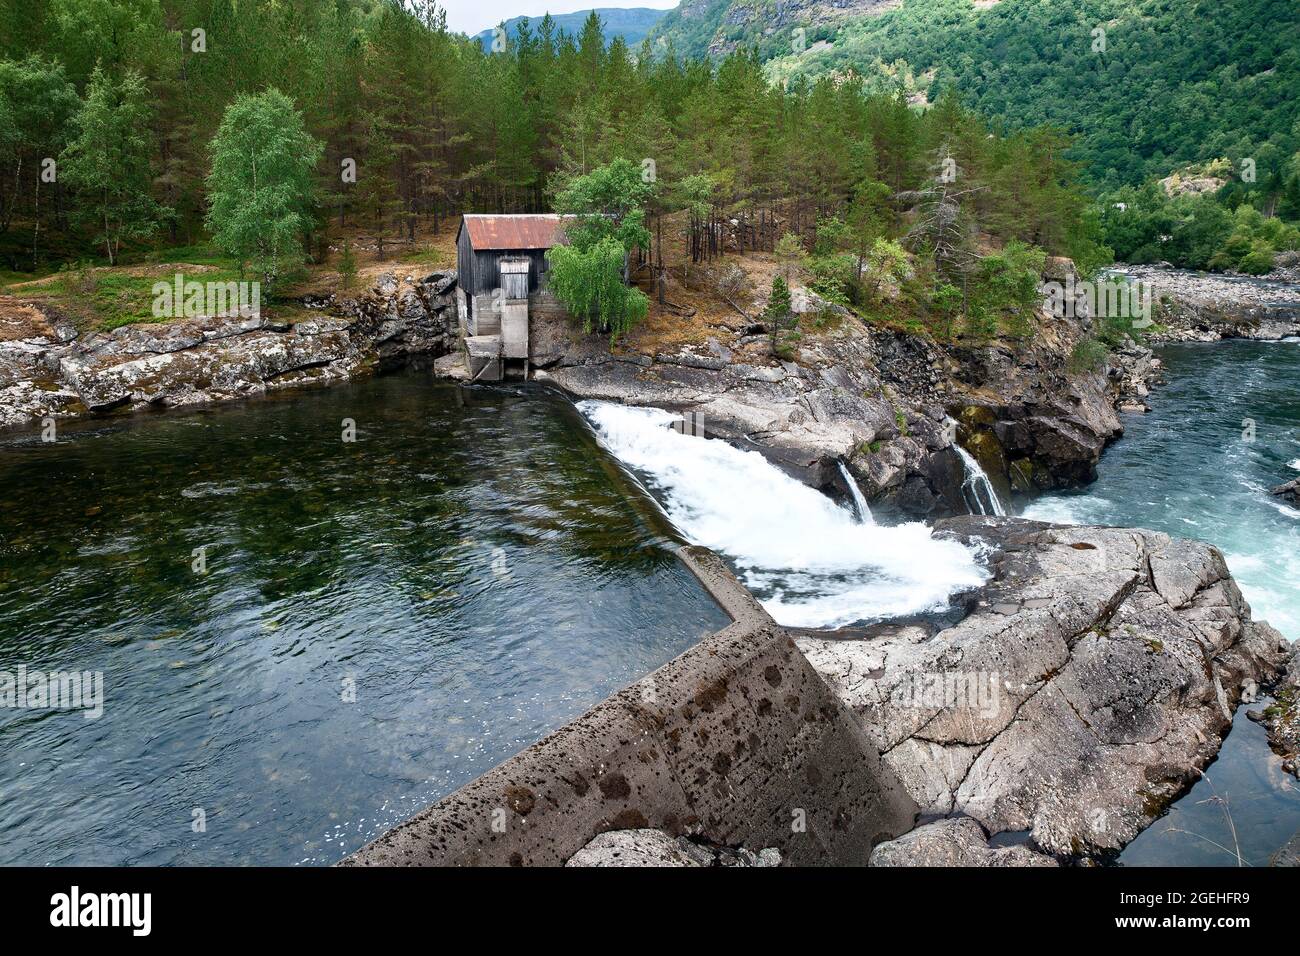 Old pumping station at a river near Sognefjord, Norway Stock Photo